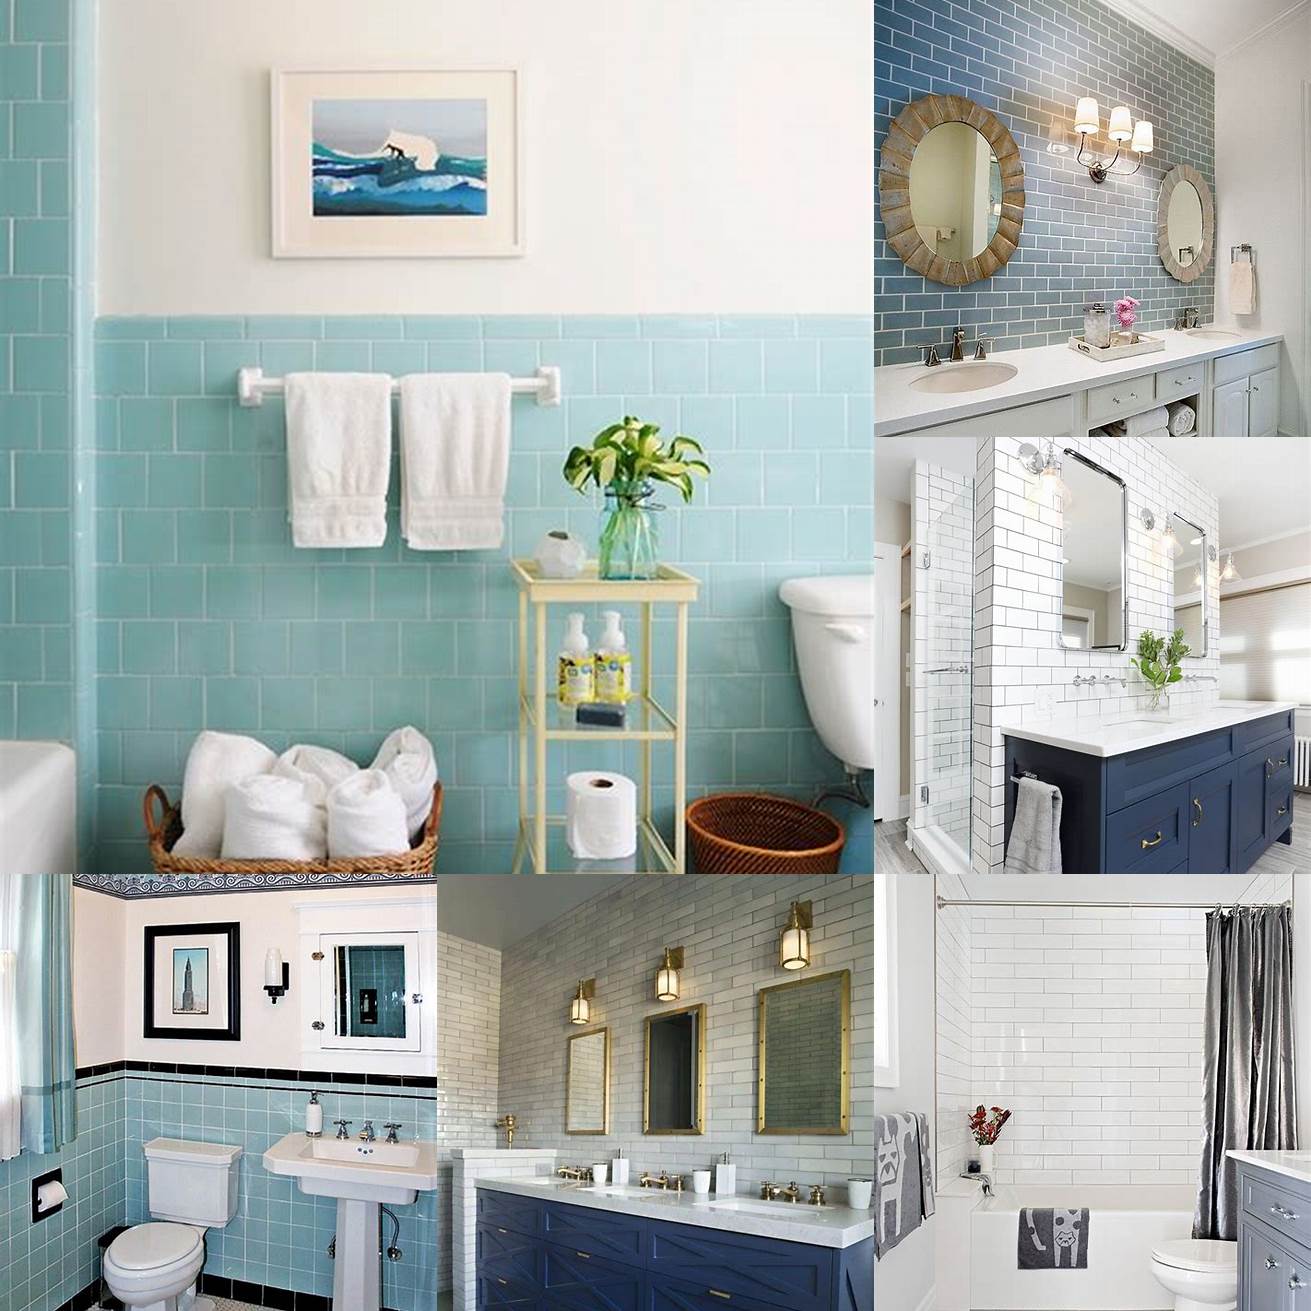 A blue bathroom with a subway tile wall and a vintage-inspired vanity